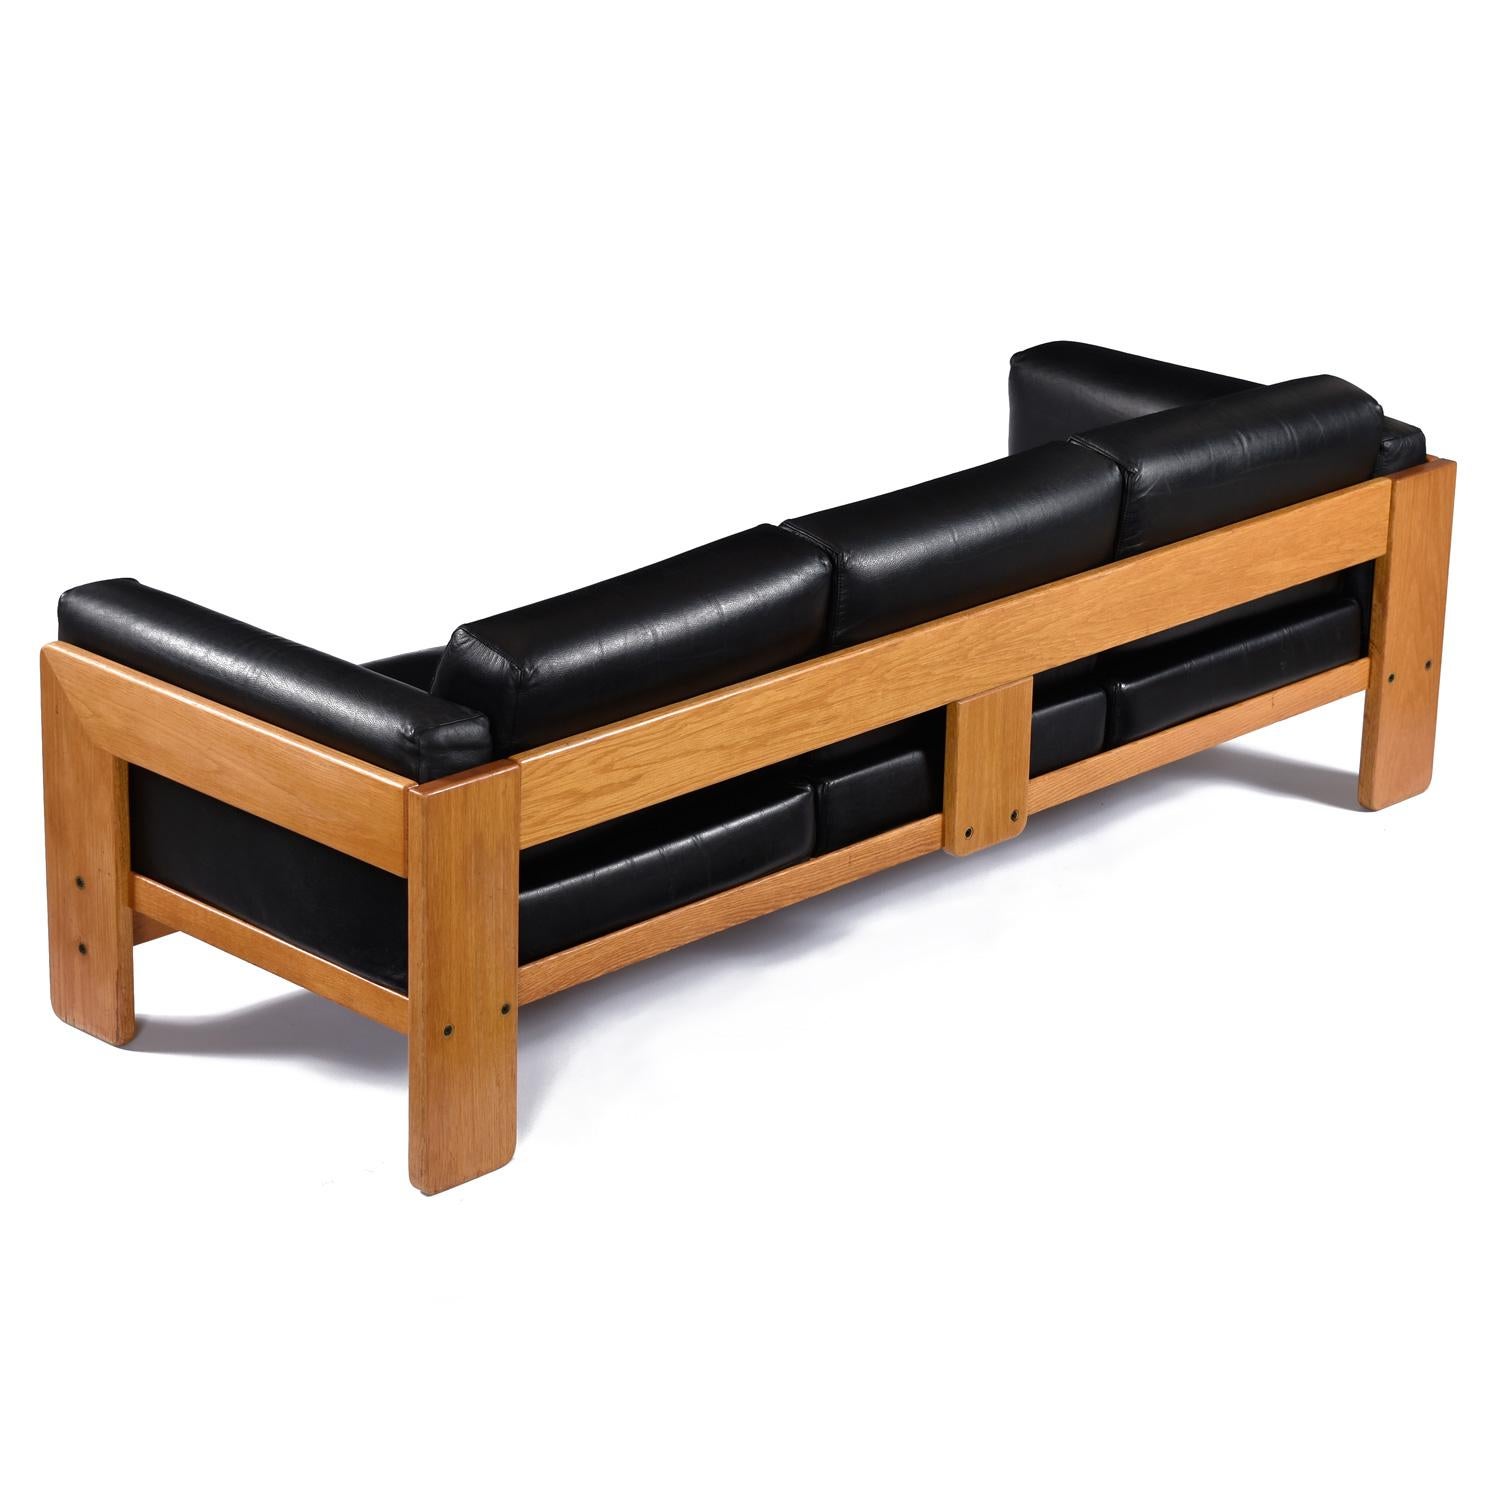 Vintage 1978 Tobia Scarpa for Knoll Bastiano sofa. Black leather against this honeyed oak is the most visually pleasing combination option illustrated by The Bastiano sofa. The leather is thick and durable, yet soft and pliable. Design aficionados